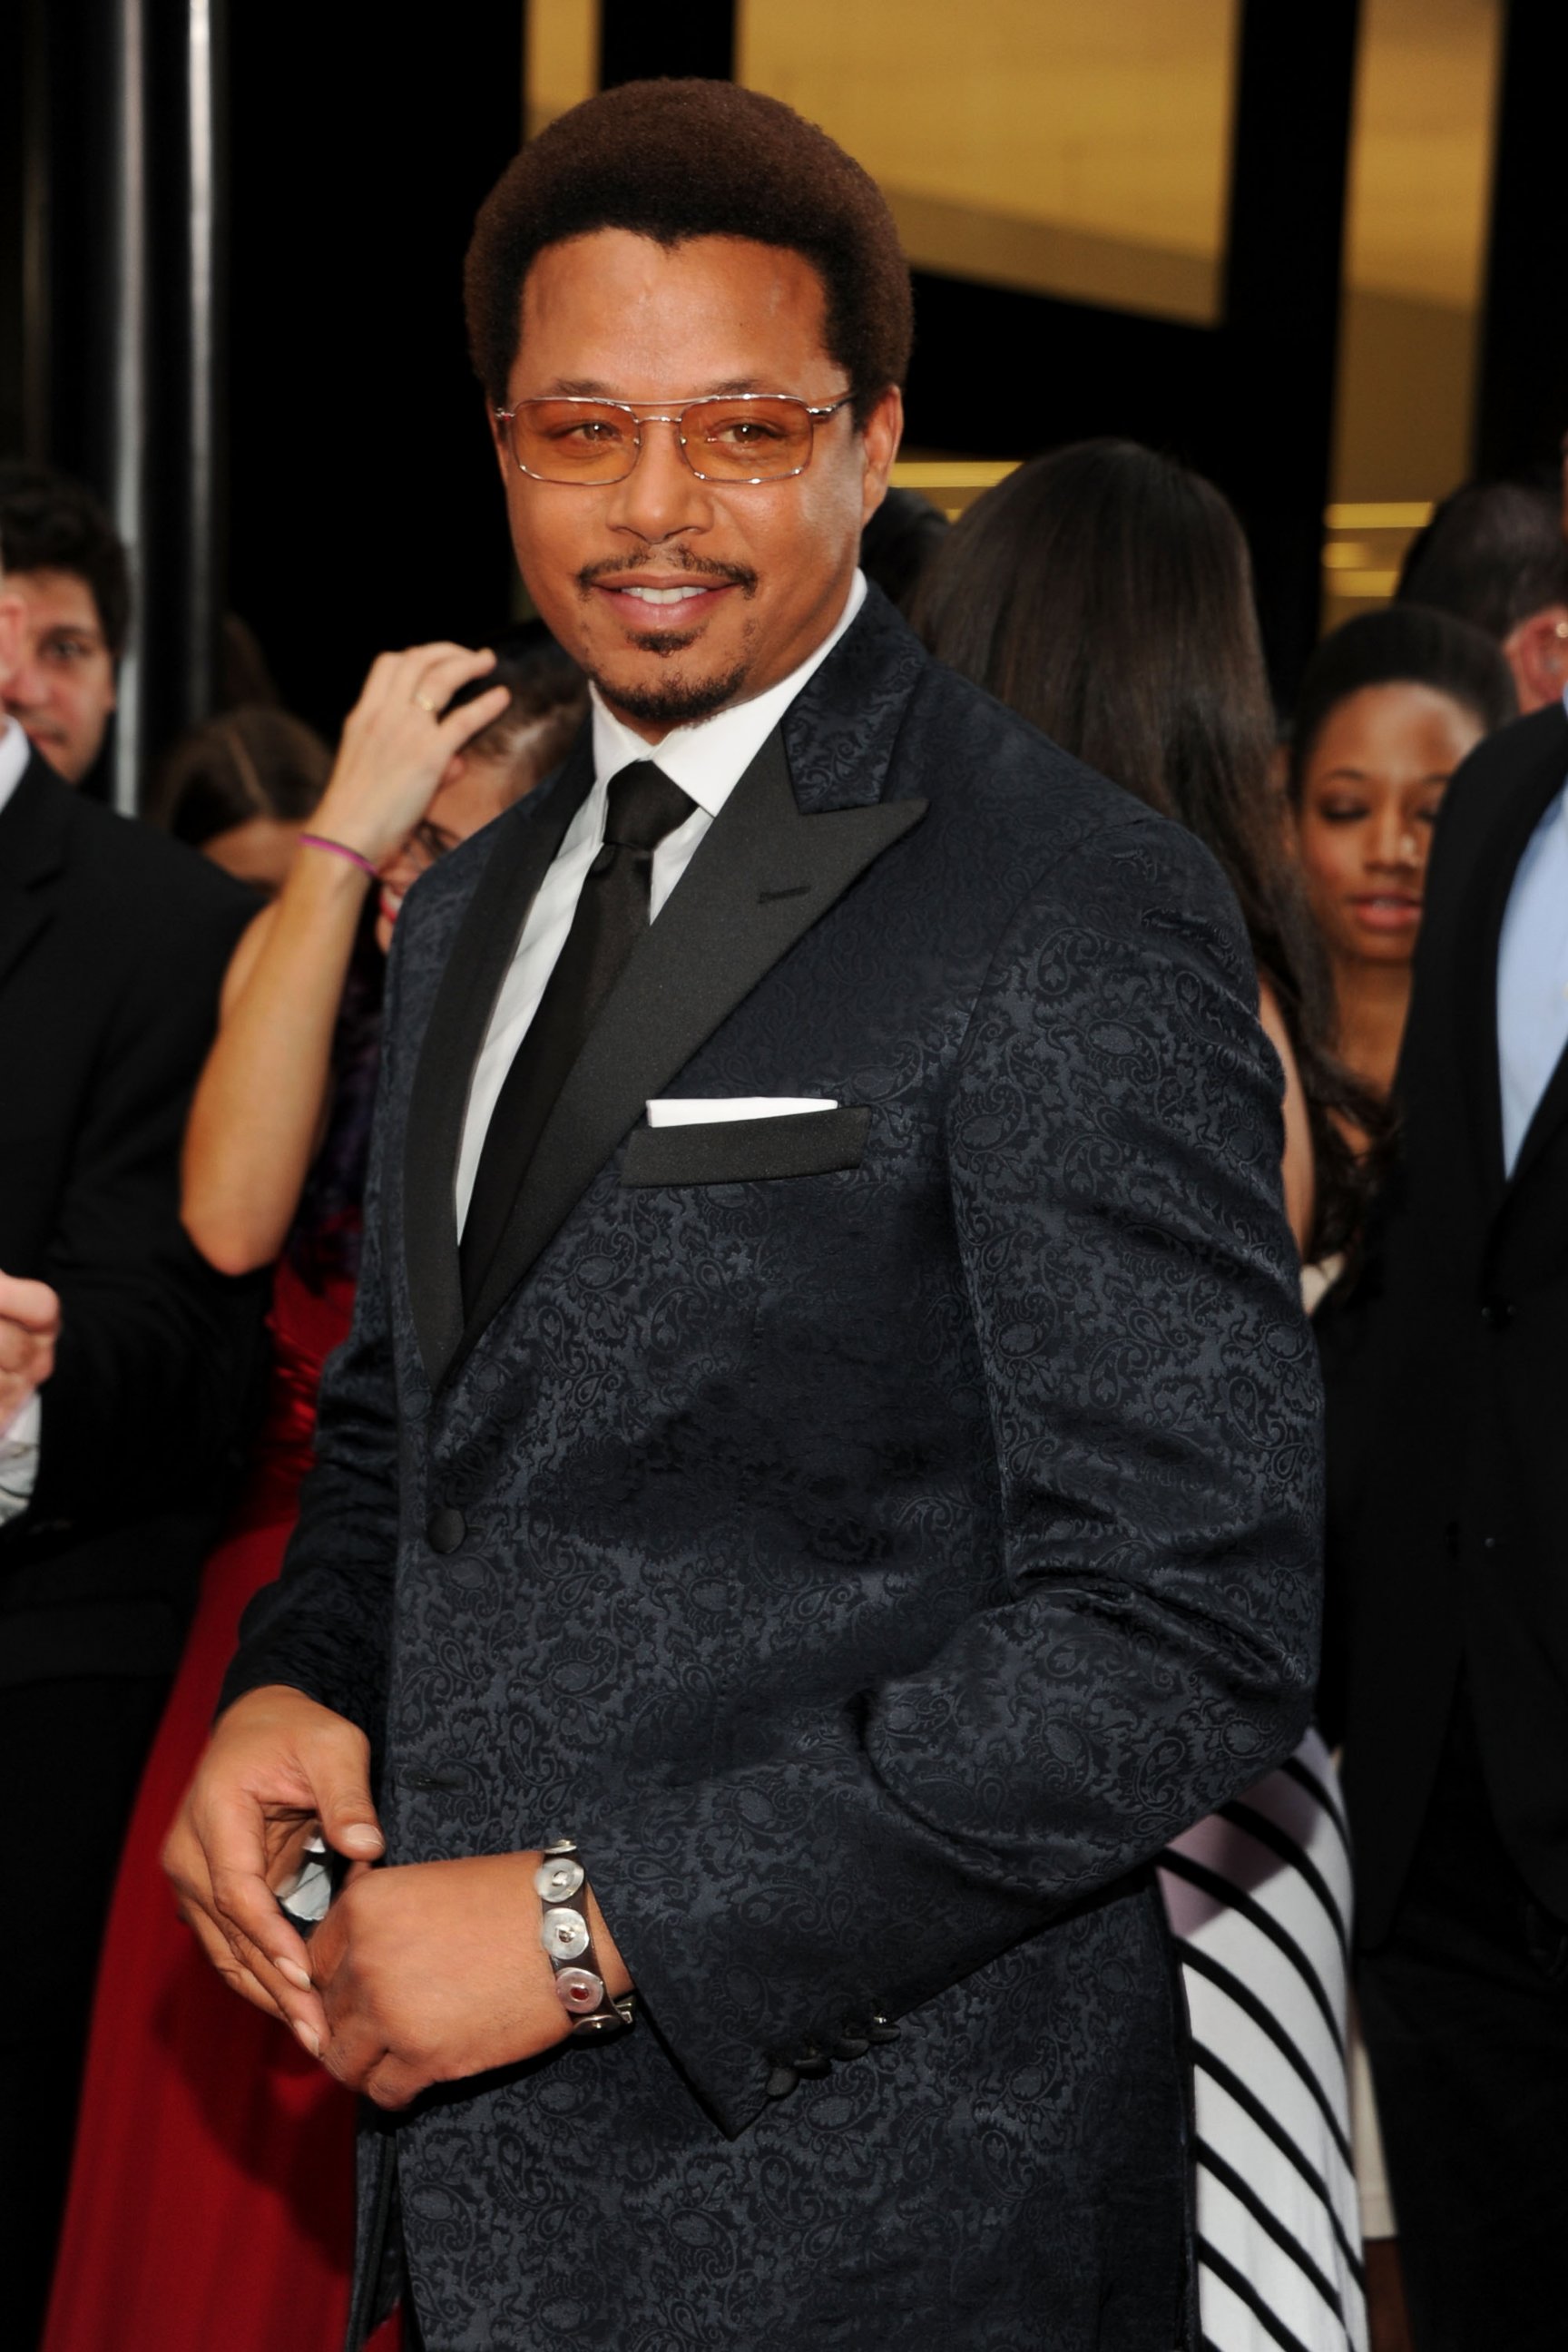 PHOTO: Terrance Howard Attends 'The Butler' Premiere